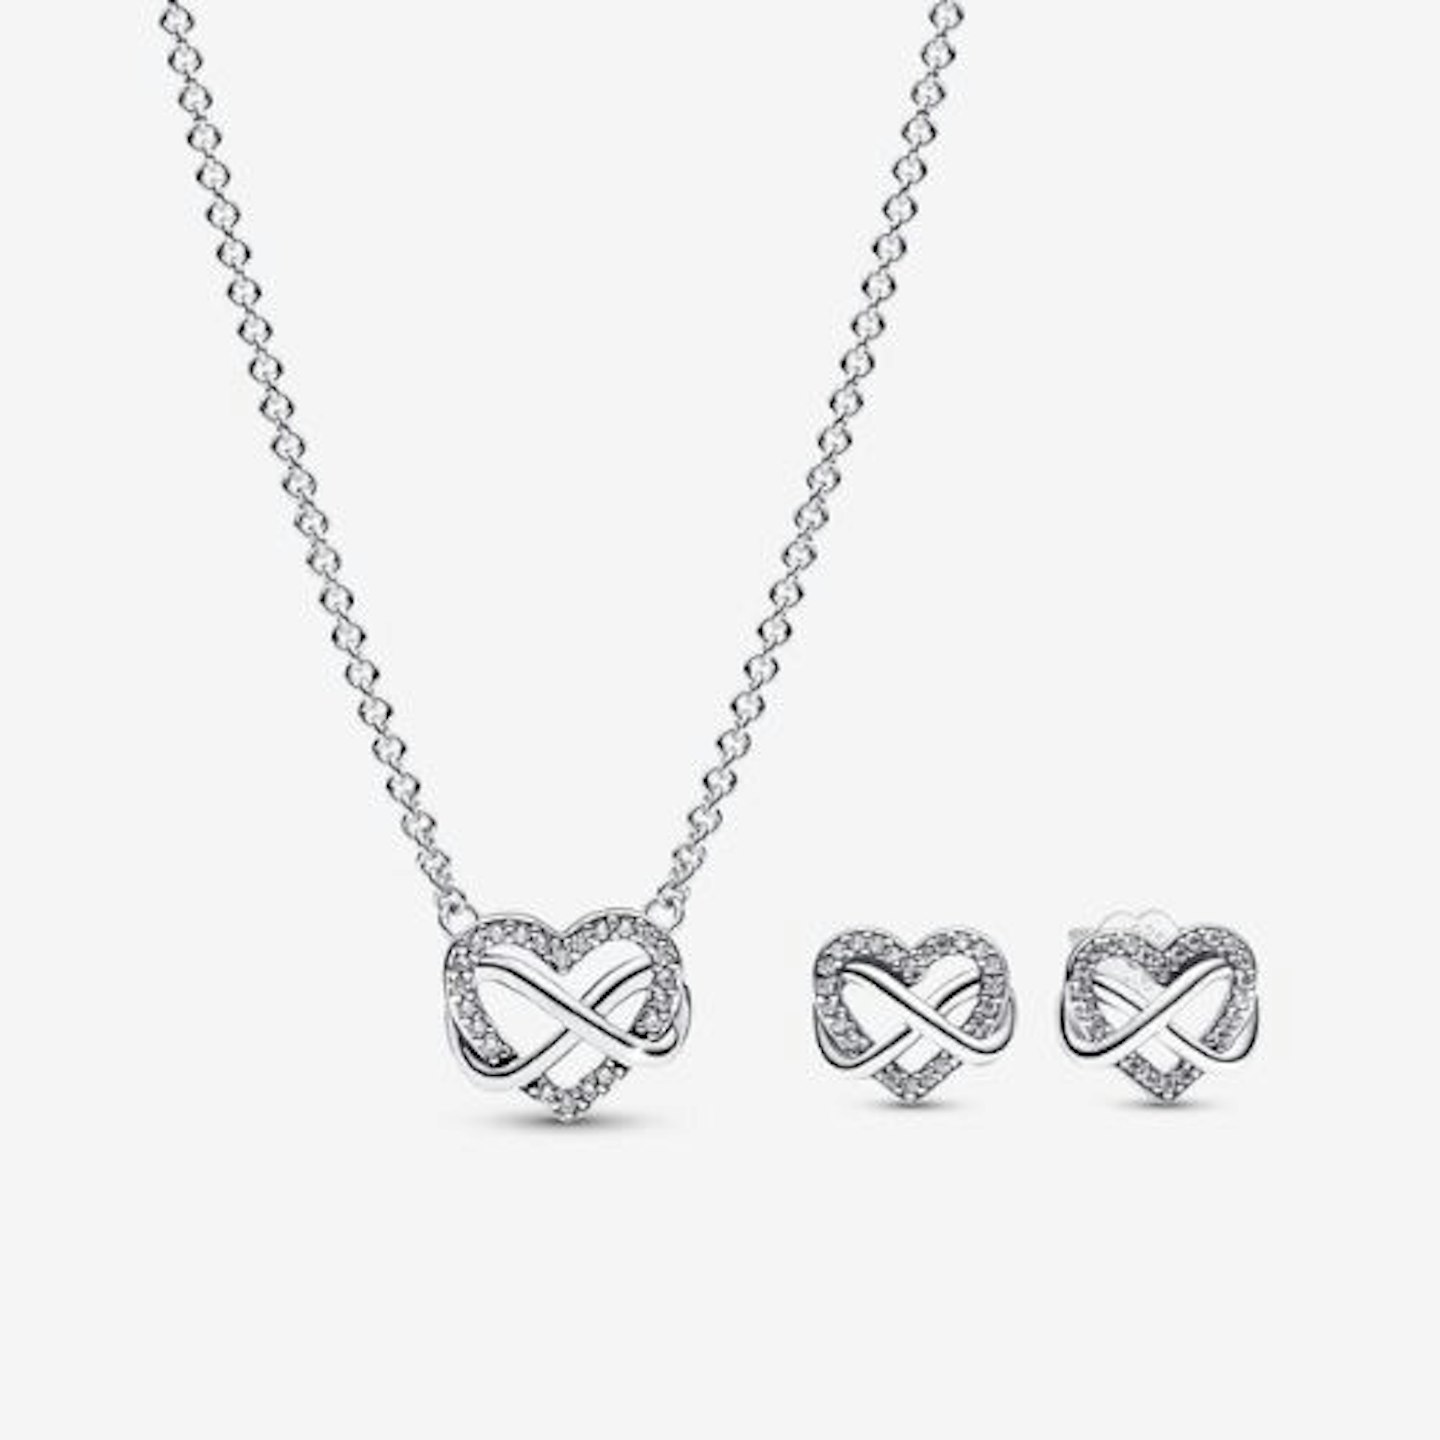 Sparkling Infinity Heart Necklace and Stud Earrings